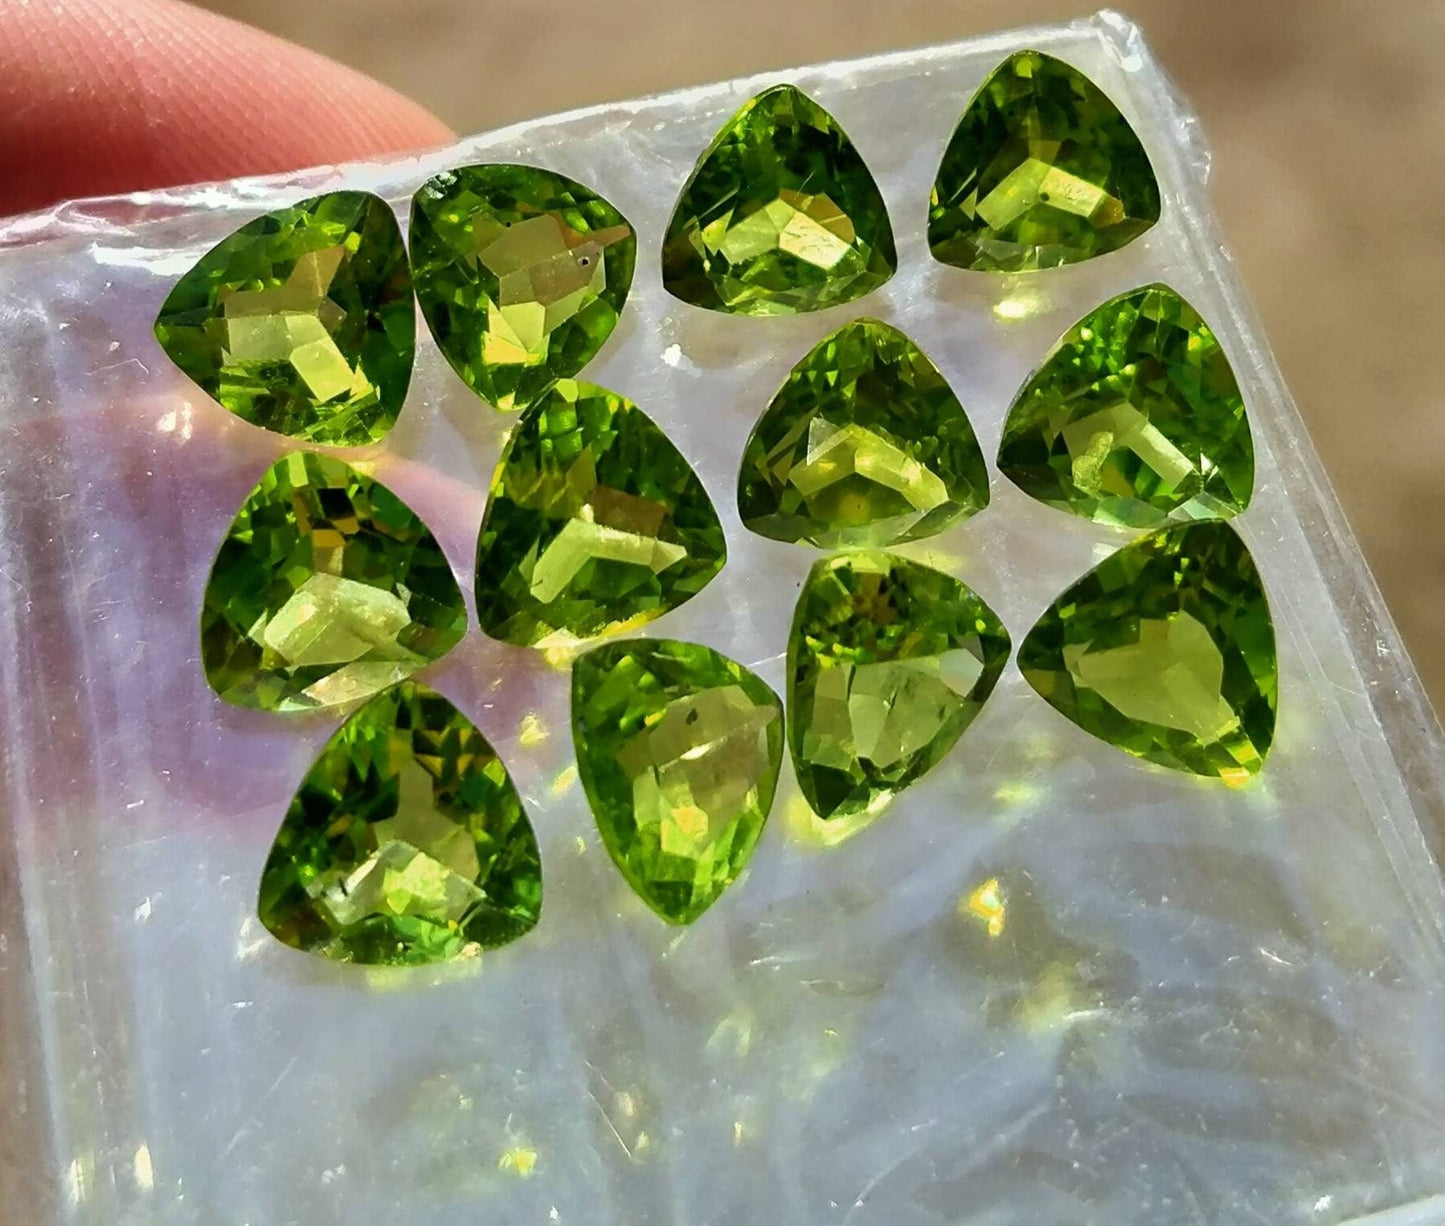 ARSAA GEMS AND MINERALSNatural top quality beautiful faceted trillion shape 22 carats green peridot gems - Premium  from ARSAA GEMS AND MINERALS - Just $150.00! Shop now at ARSAA GEMS AND MINERALS